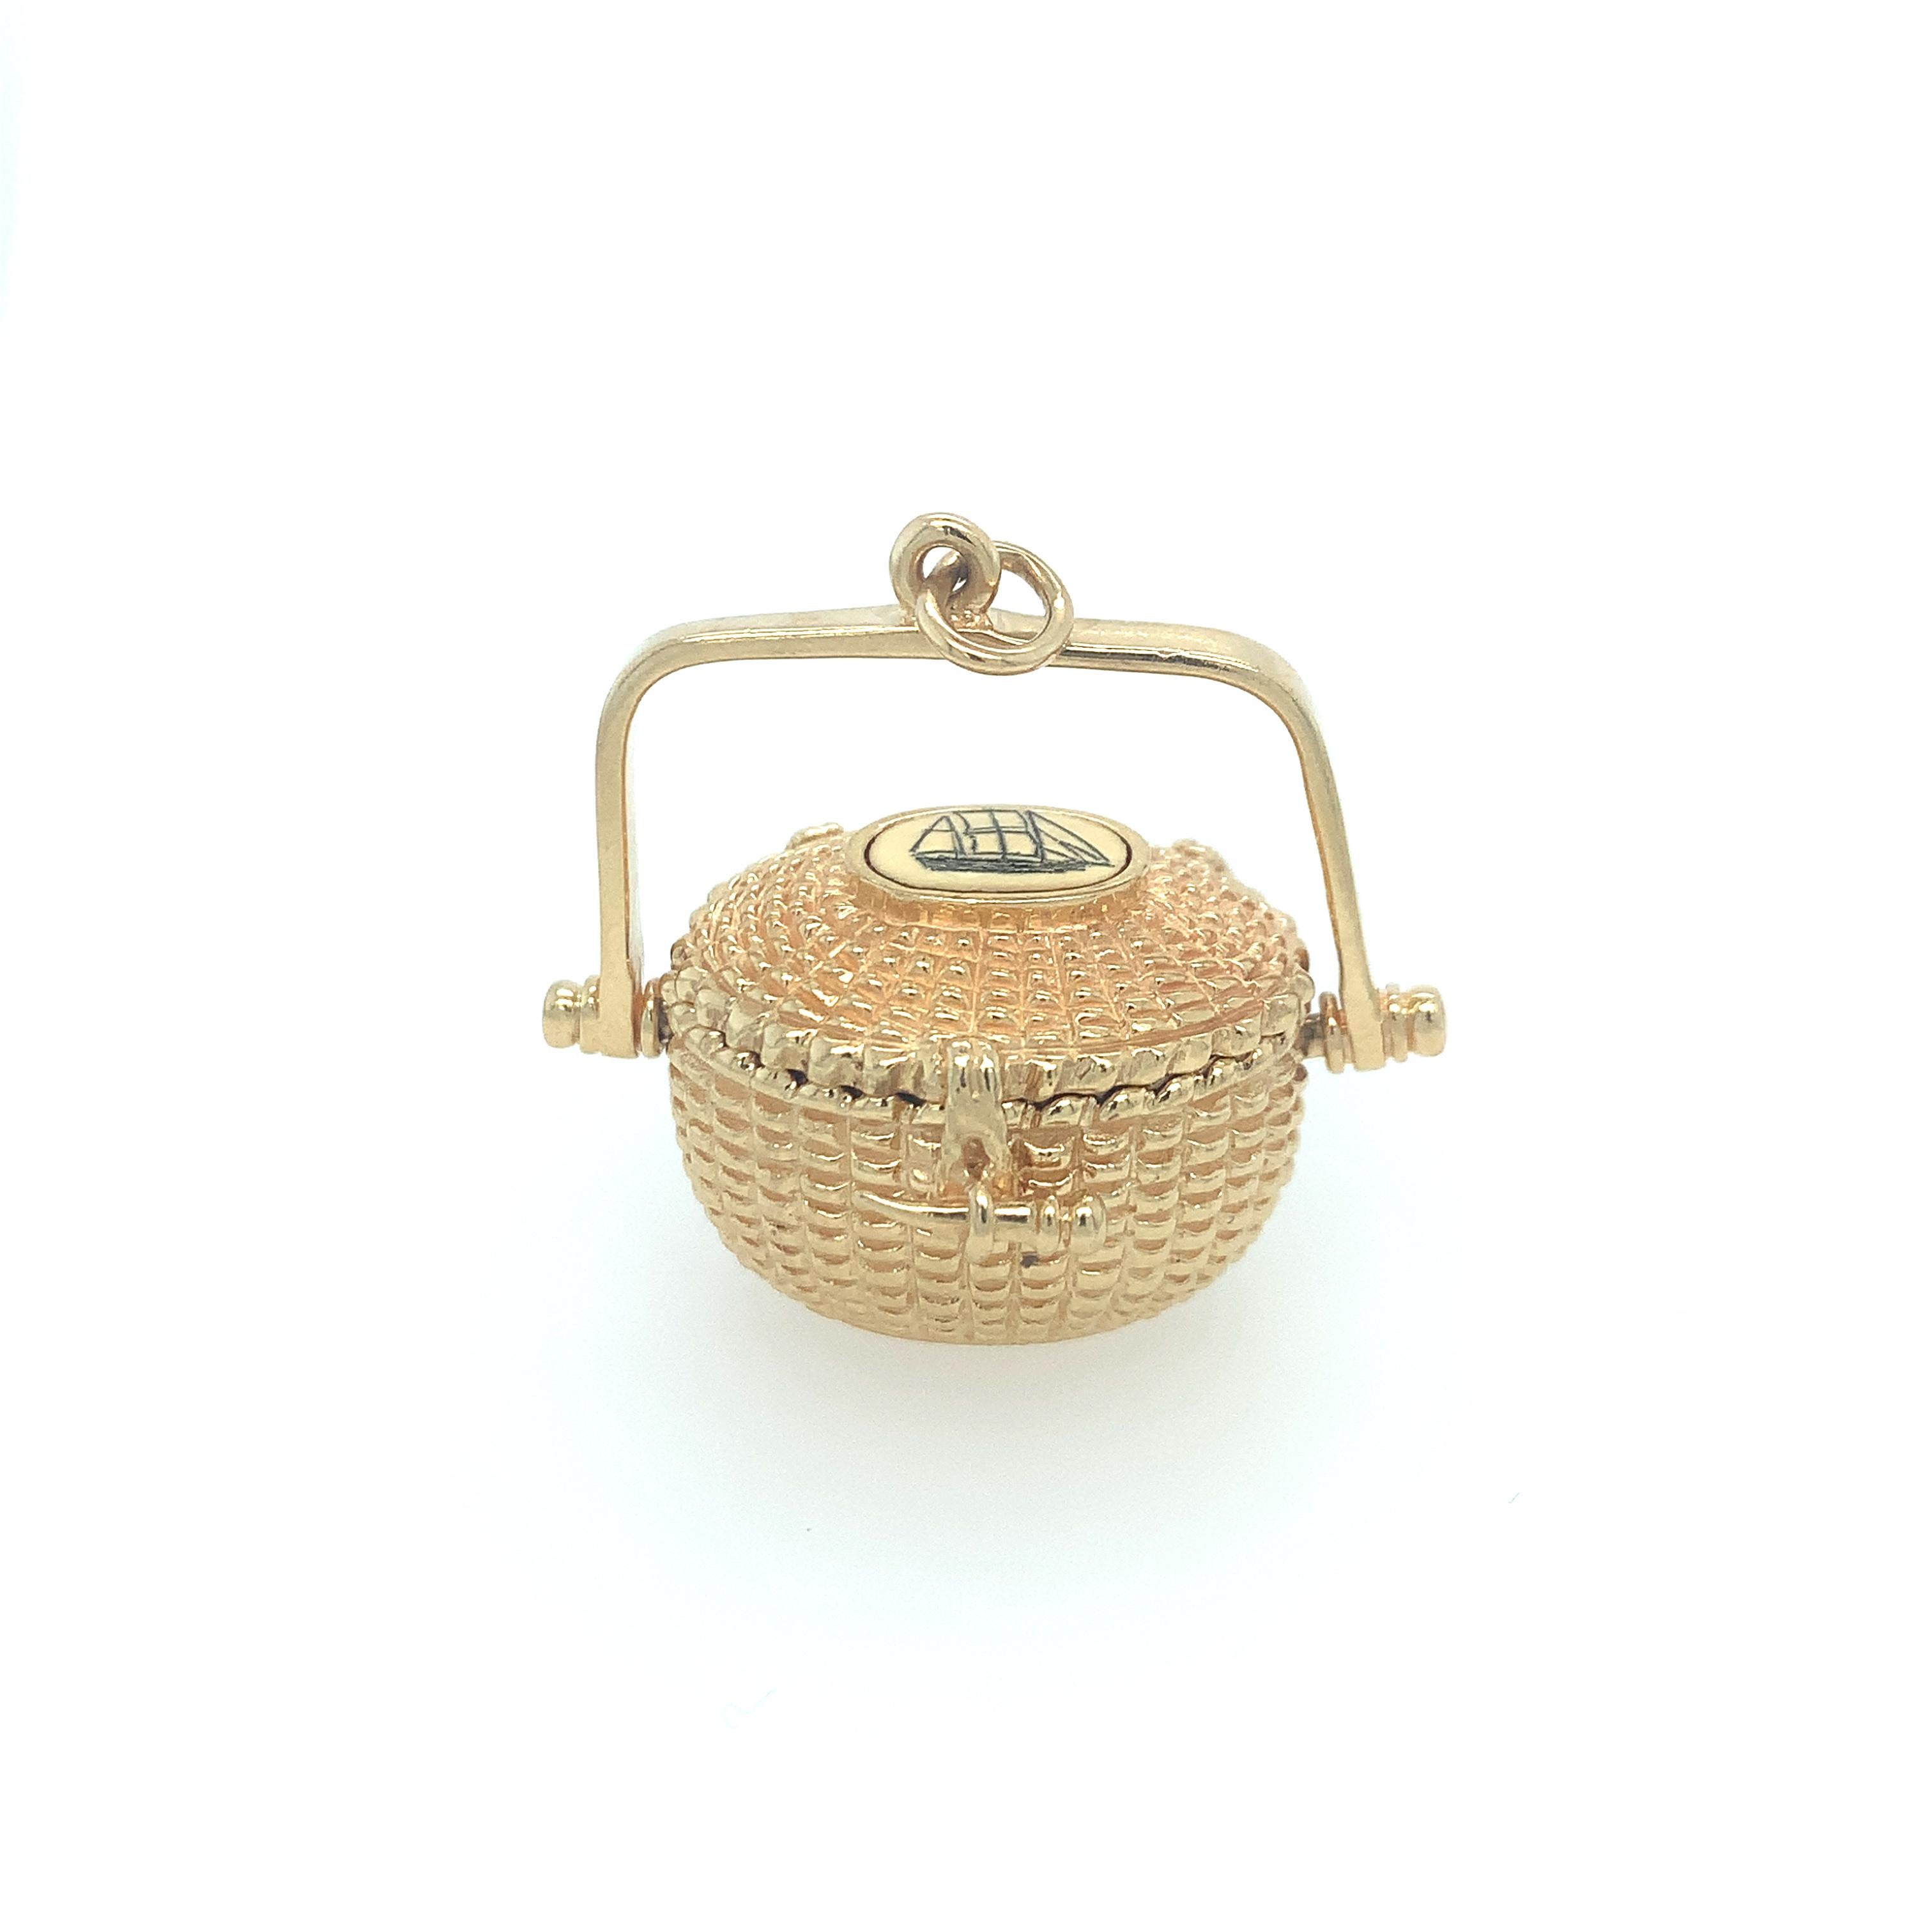 In 1977, Glennan Robbins designed the first gold Nantucket lightship basket. A delicate sailboat is featured on an oval field atop the lid. An example of intricate design, this Nantucket basket features a swinging handle, a working lid, and an oval